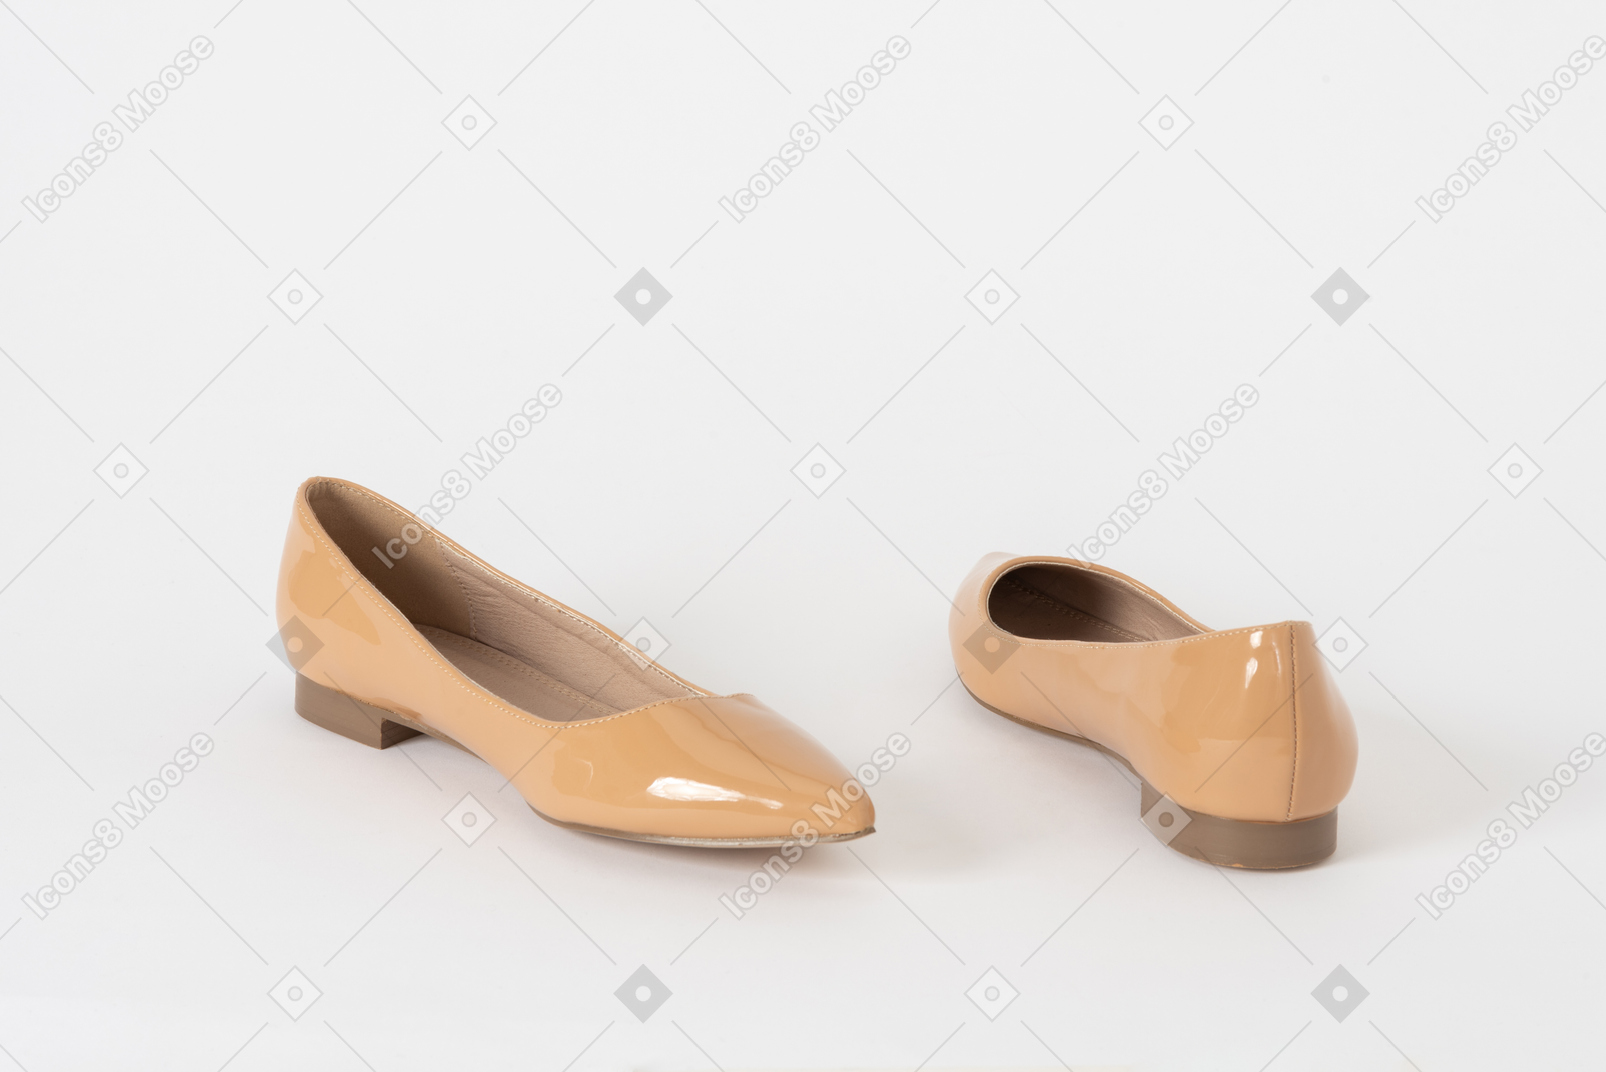 A shot of a pair of beige lacquer low heel shoes lying on the floor